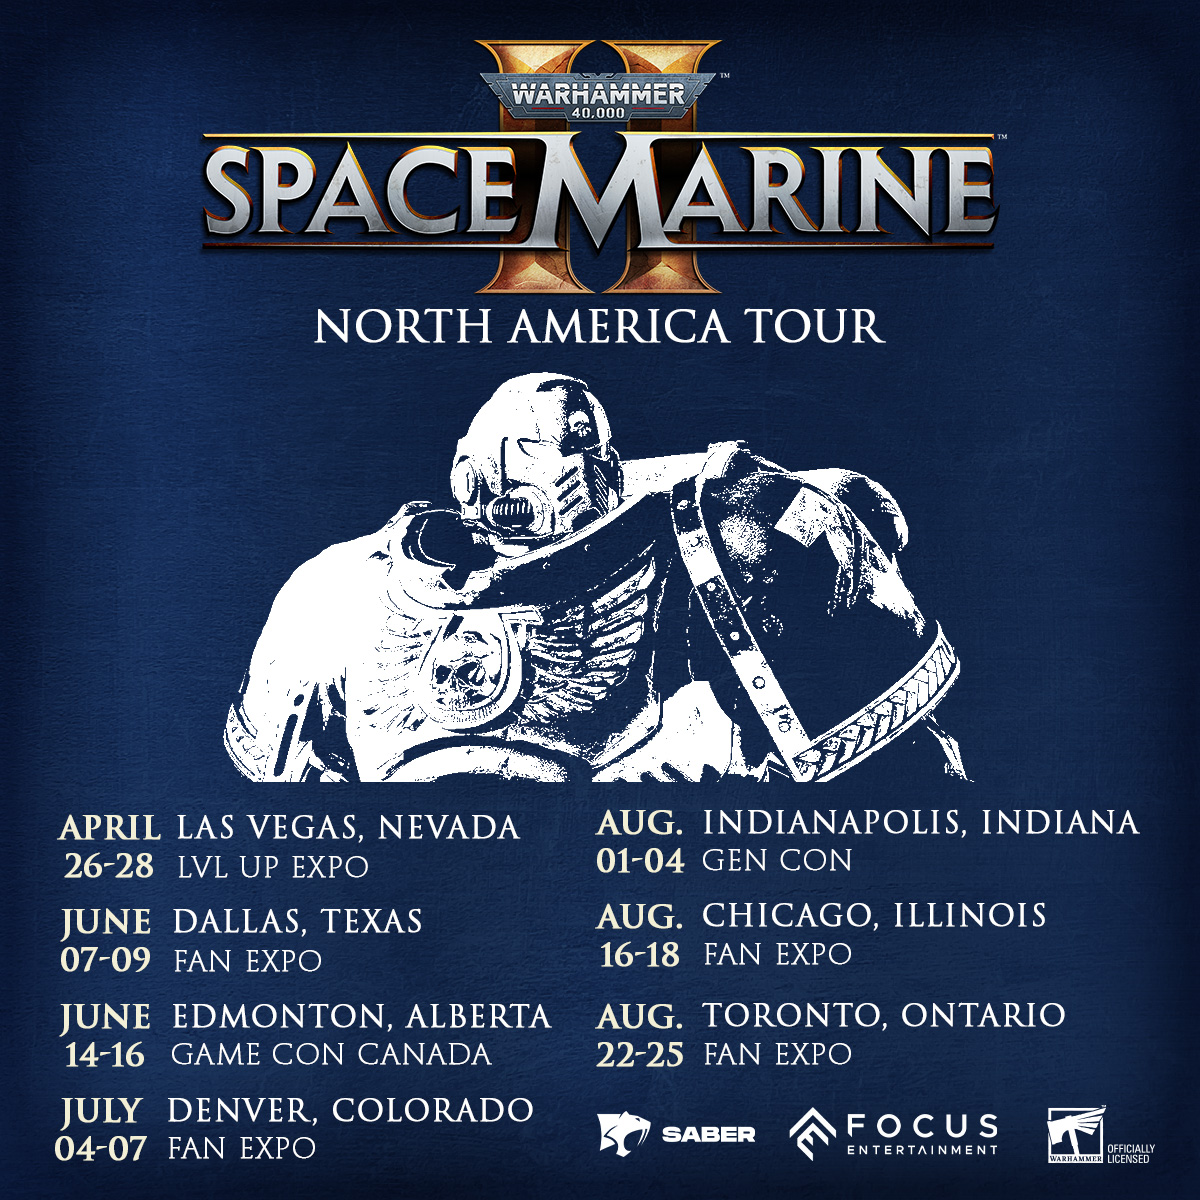 We are showcasing #SpaceMarine2 in the US and Canada for our first North America Tour! 🦅🍁 Get your hands on it for the first time and experience the brutality of Space Marine 2! 👉 Check the dates to make sure you don't miss it!